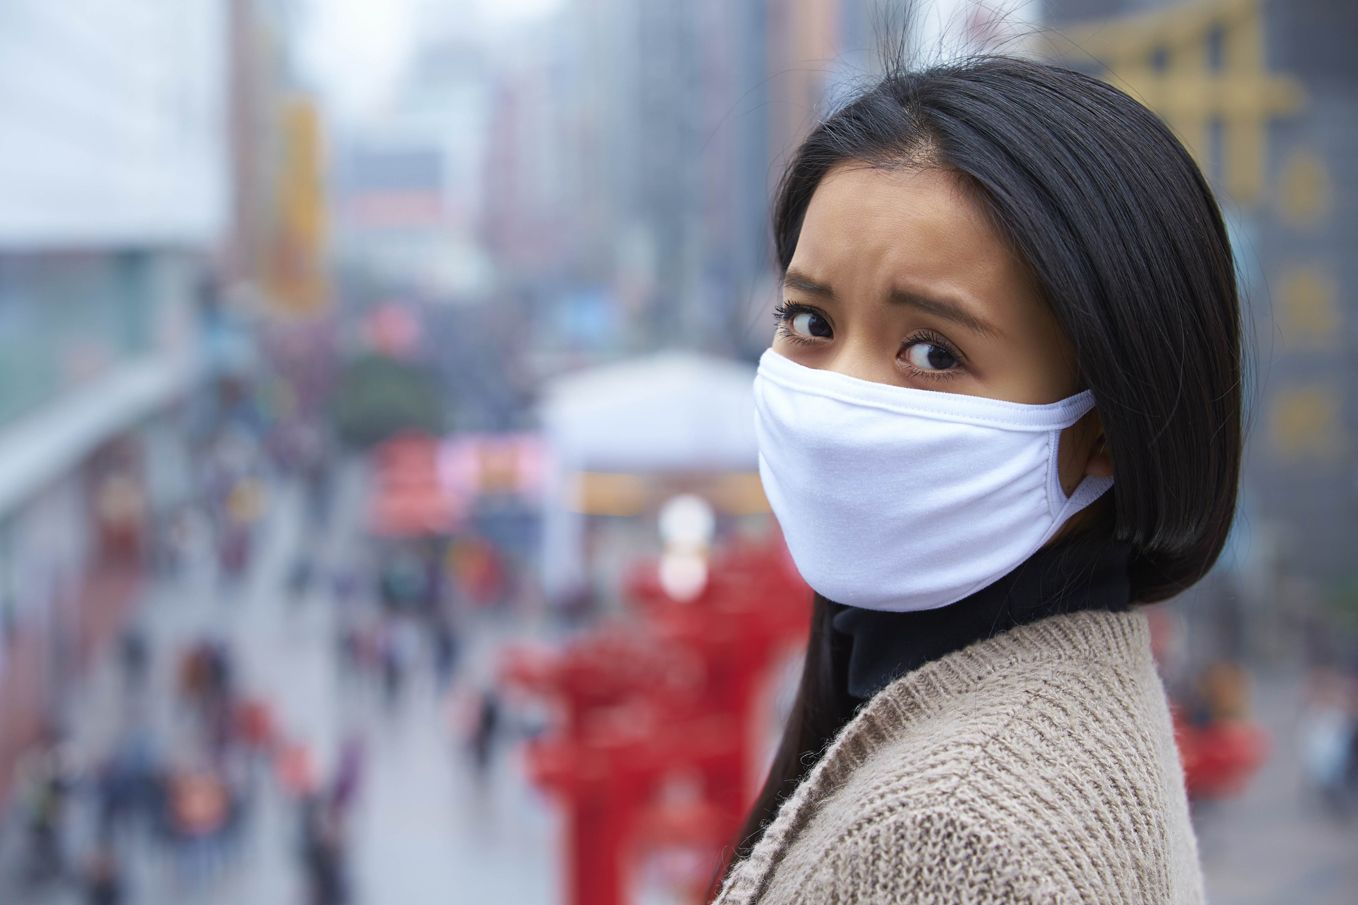 pedestrian-sirmulation-for-air-pollution-exposure-study-istockphoto-bo1982-7eac154fde4256f56bf8d7e368f84bf7.jpg